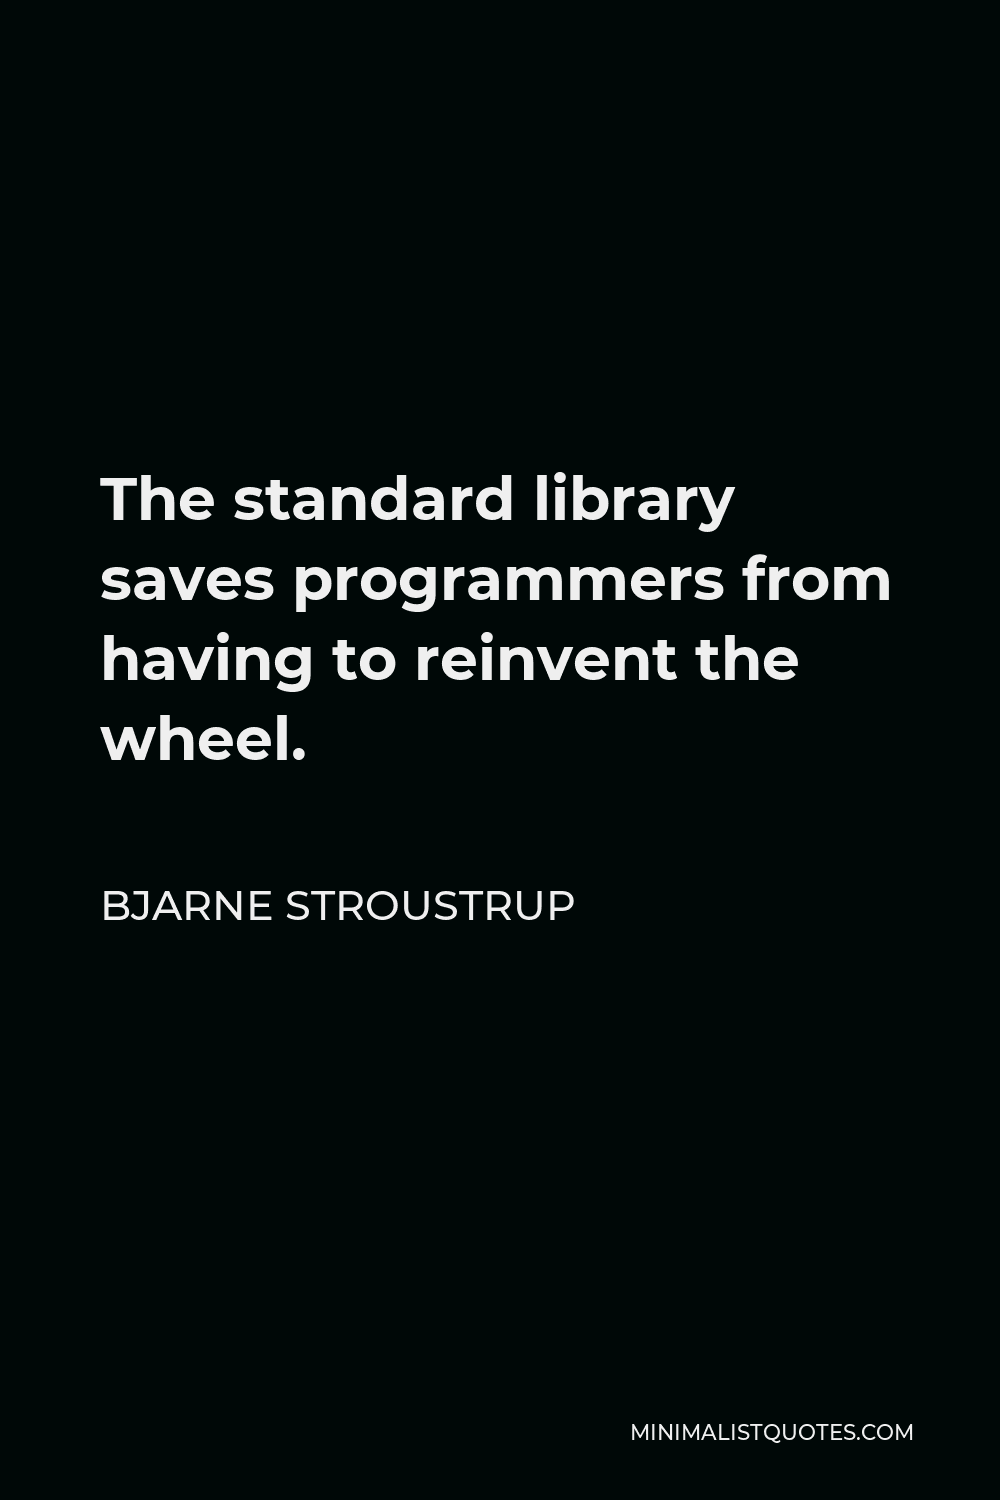 Bjarne Stroustrup Quote - The standard library saves programmers from having to reinvent the wheel.